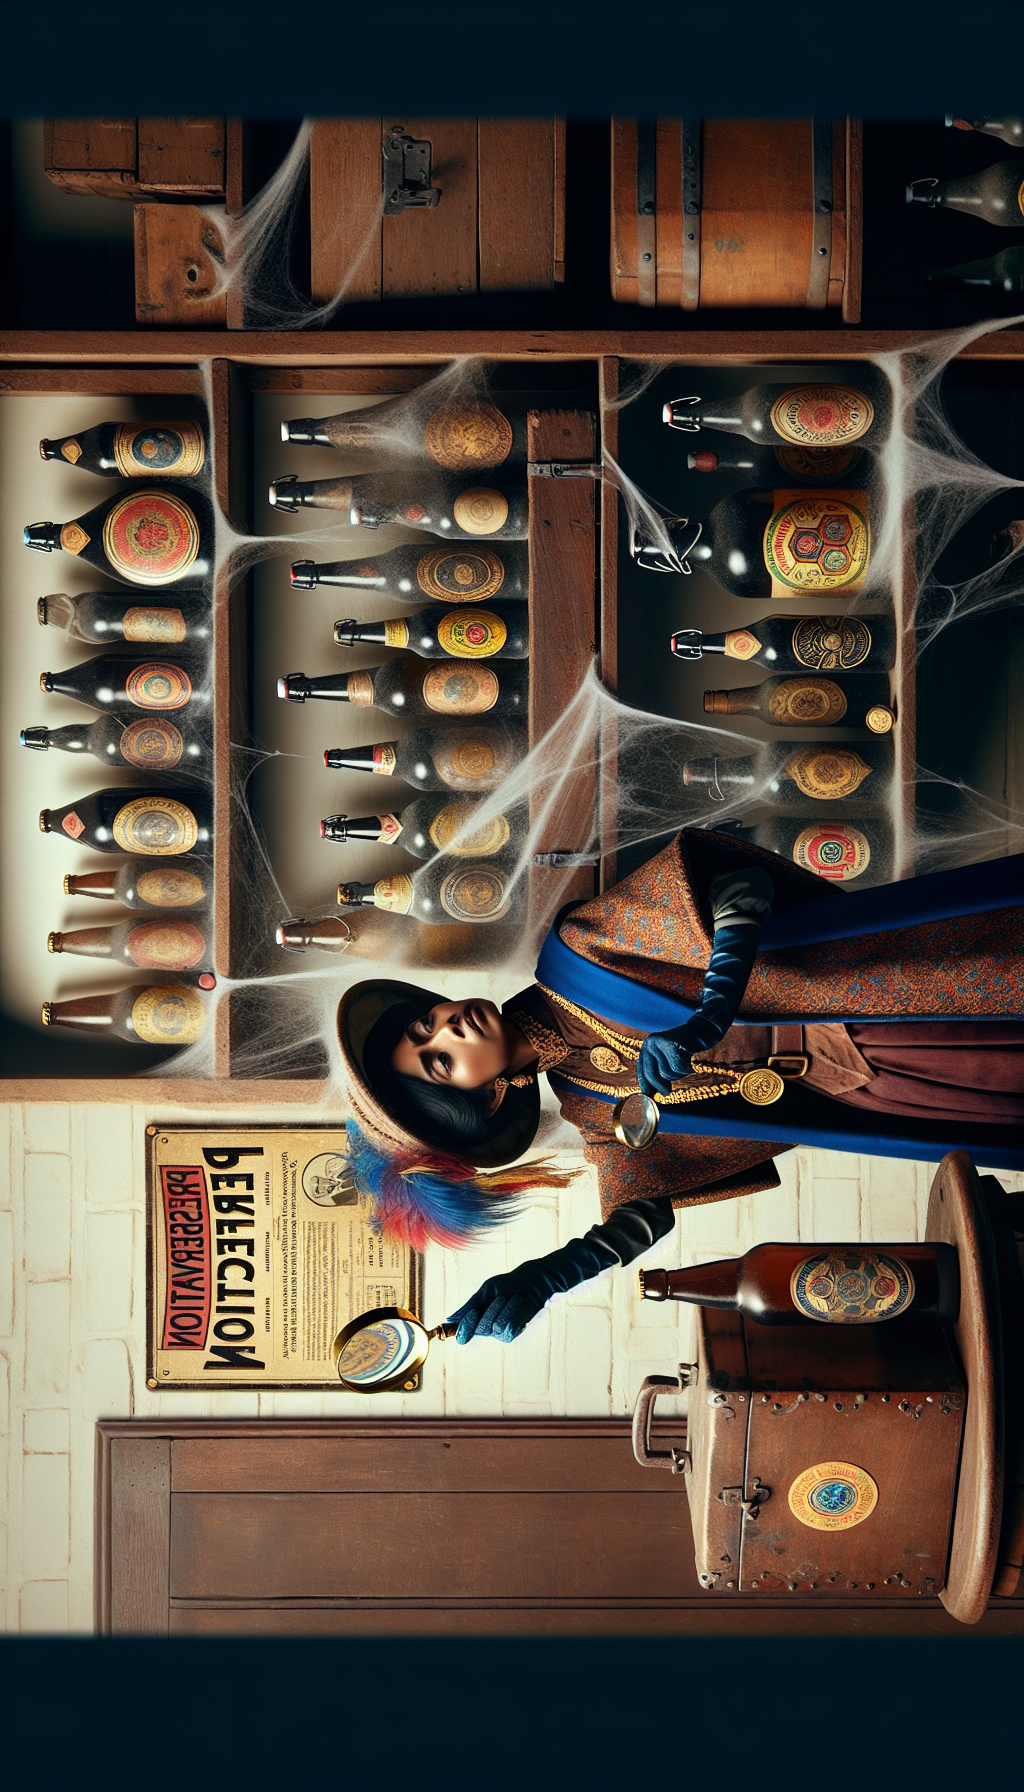 A whimsical time-traveling beer sommelier carefully dusts off a row of ancient, cobweb-draped bottles on antique wooden shelves, with a magnifying glass in one hand, highlighting unique emblems and age markers on the bottles. A vintage label on the bottom corner flaunts the title "Preservation Perfection," written in elegant script. The contrasting styles blend medieval artistry with modern graphic lines.